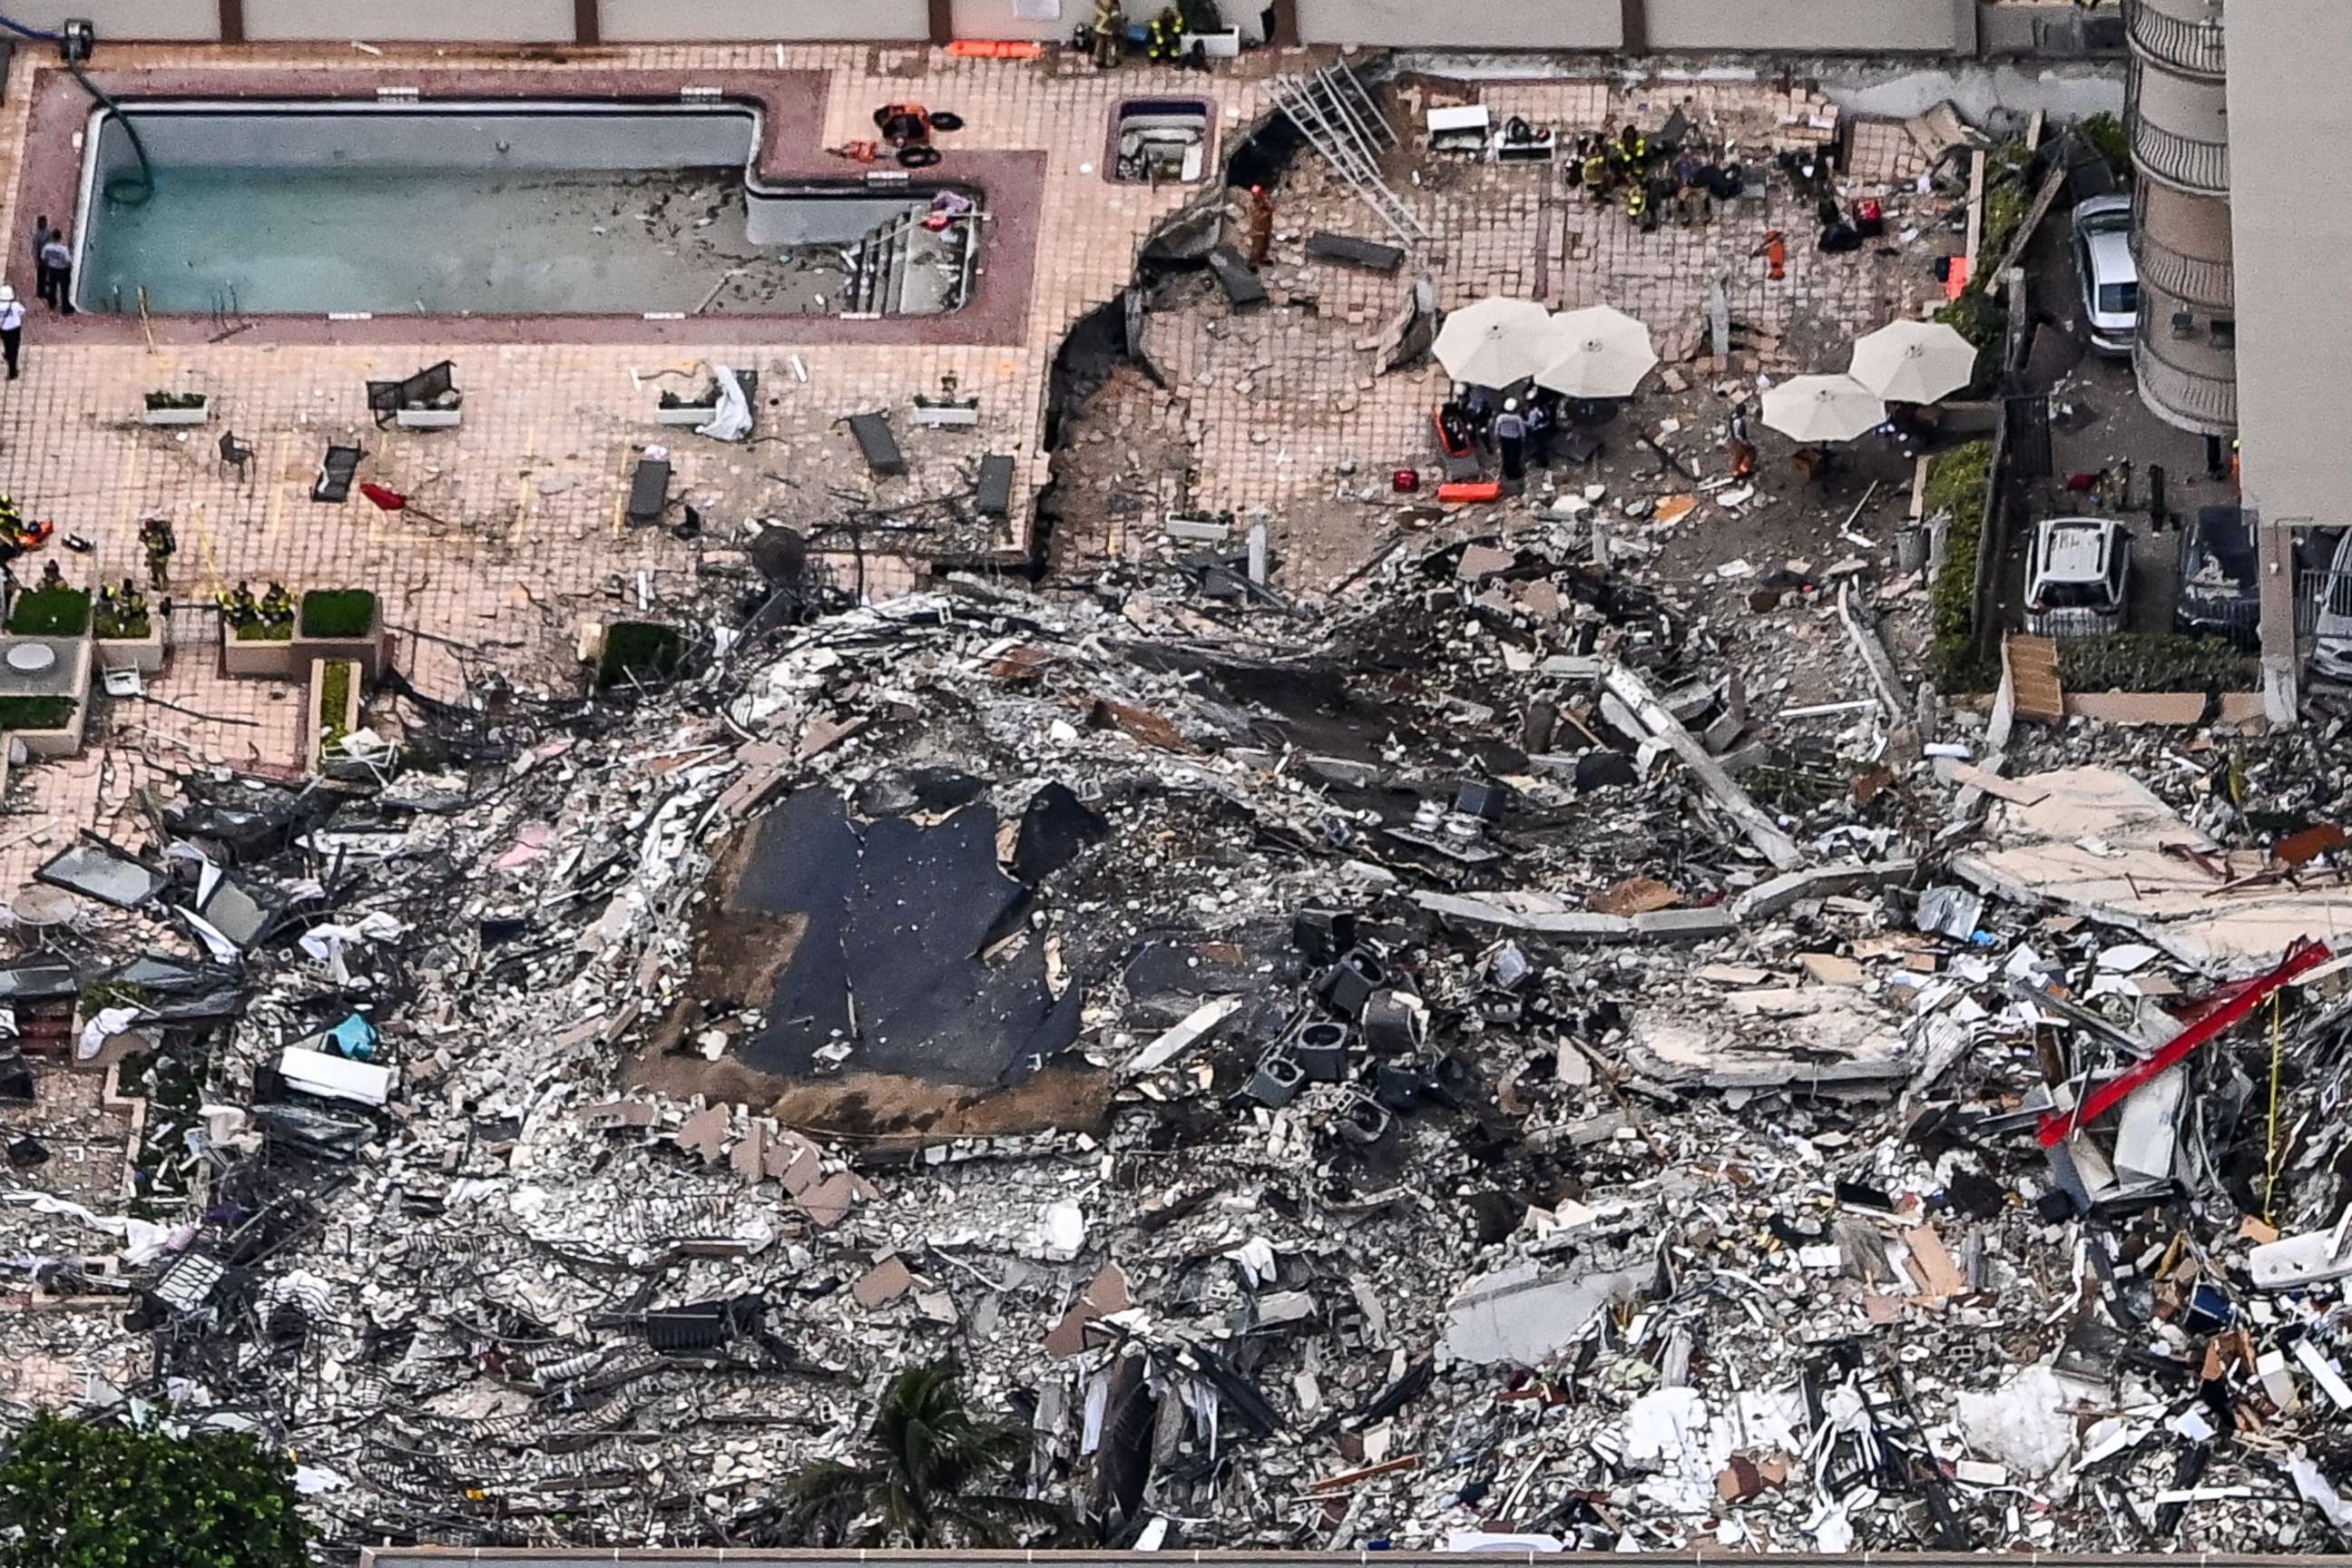 PHOTO: Search and rescue personnel work onsite after the partial collapse of the Champlain Towers South in Surfside, Fla., north of Miami Beach, on June 24, 2021.